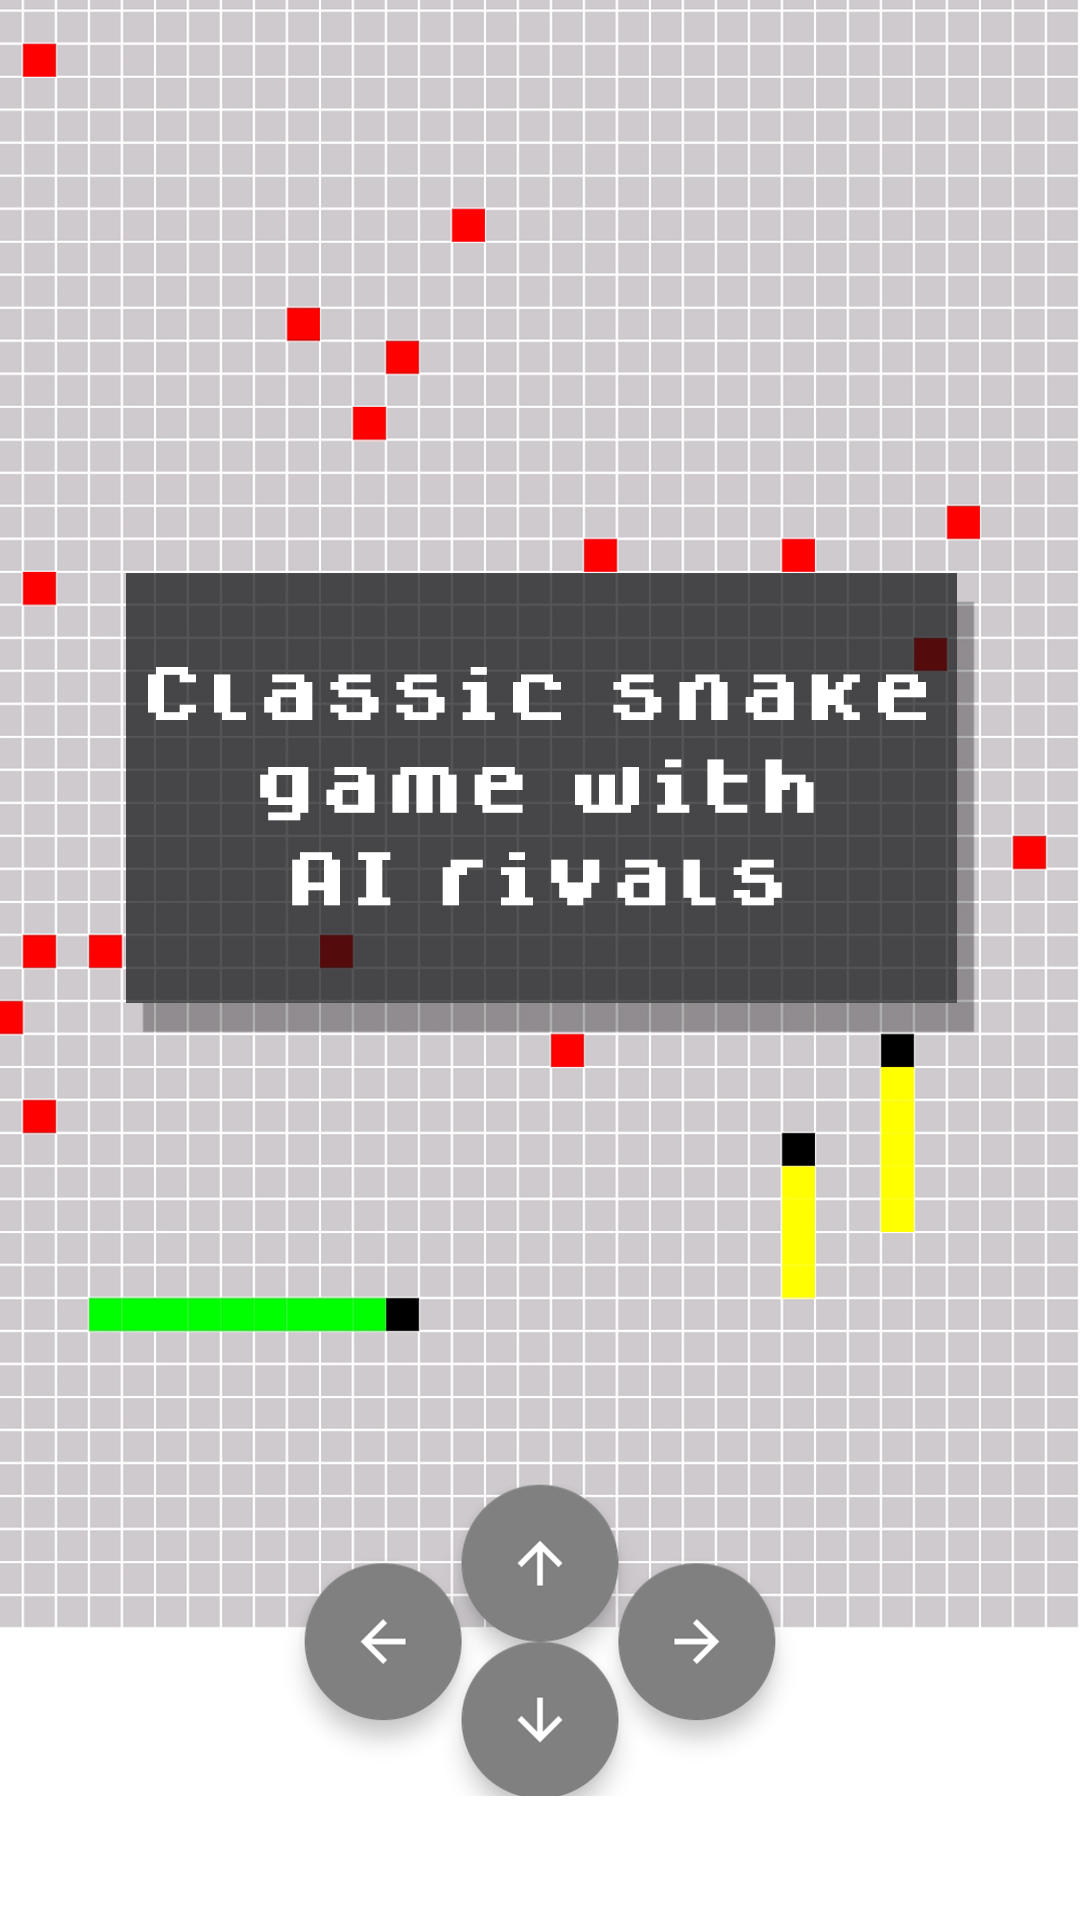 The classic Snake game from Nokia becomes a puzzle game with